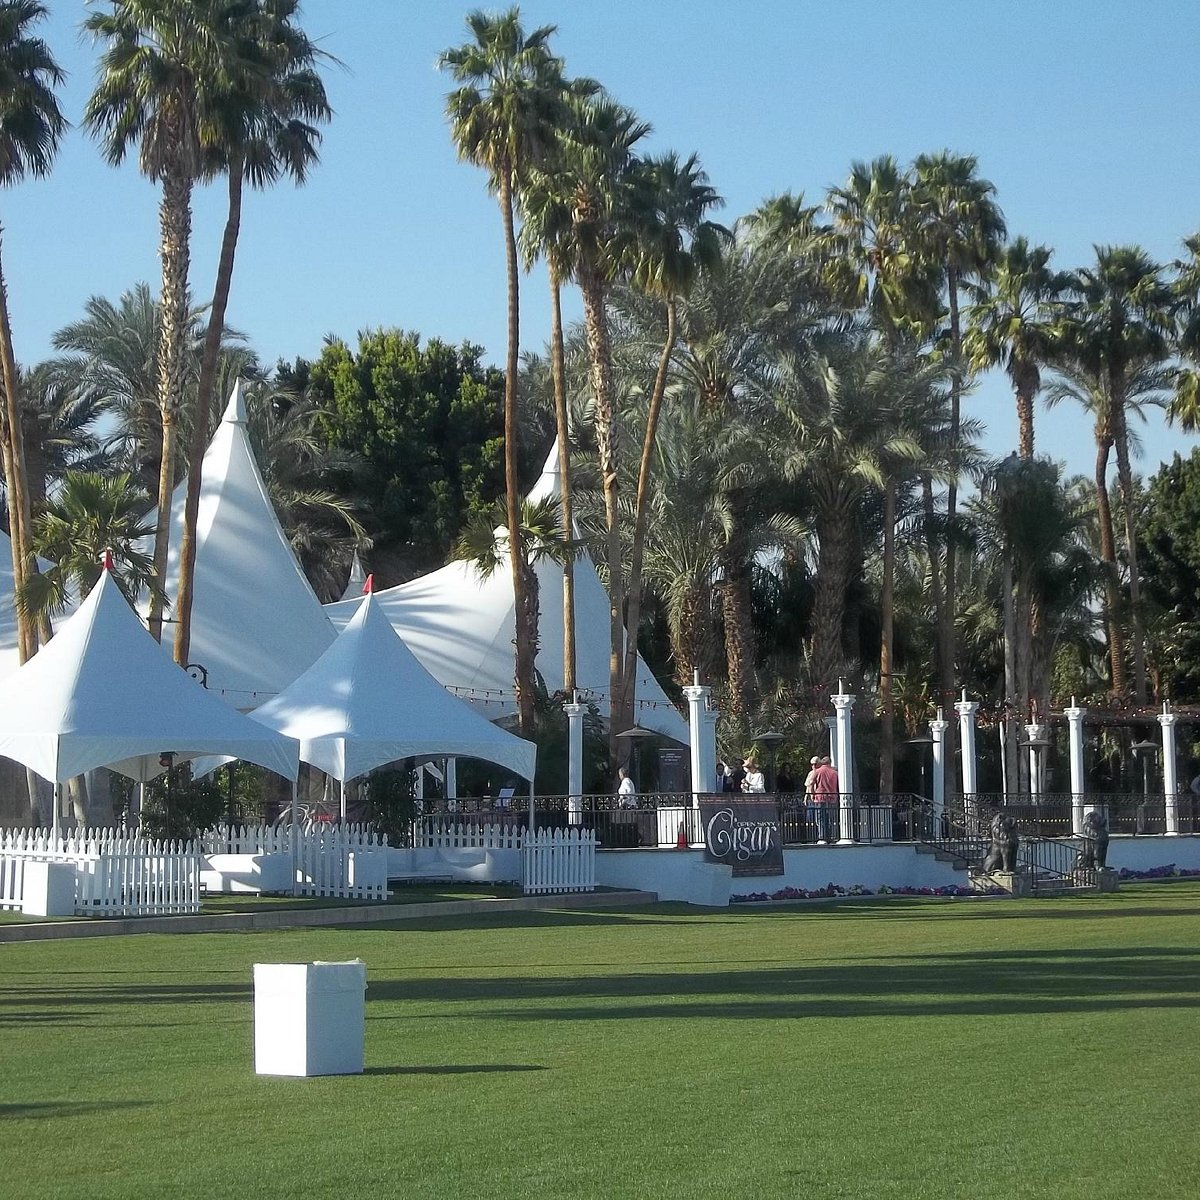 Empire Polo Club (Indio) All You Need to Know You Go